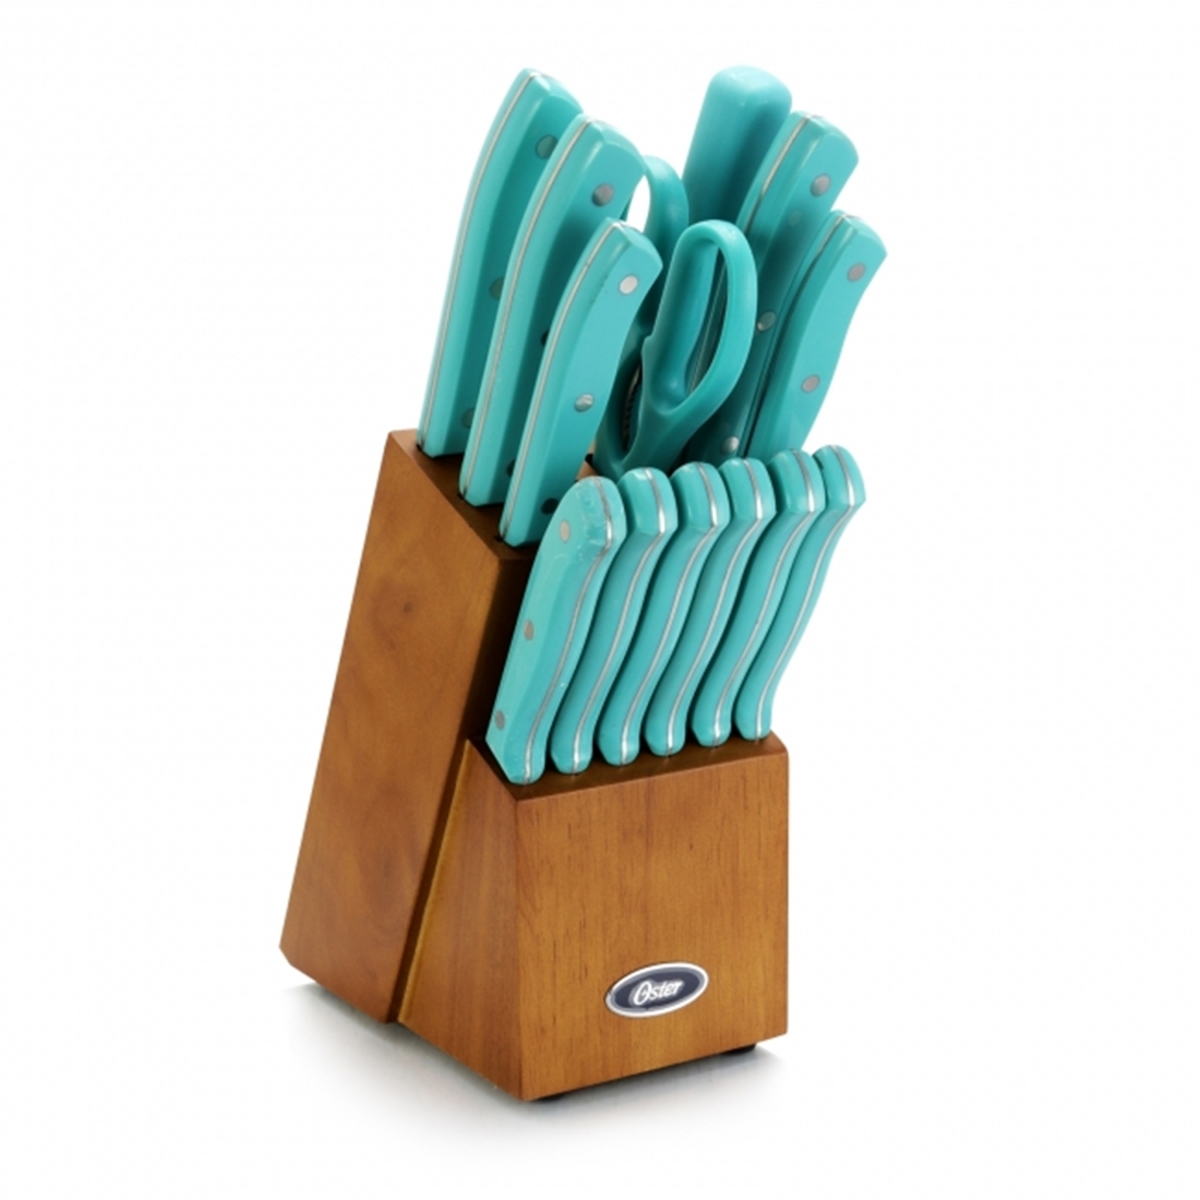 Oster Evansville Stainless Steel Blade Cutlery Set with Plastic Handles&#44; Turquoise - 14 Piece